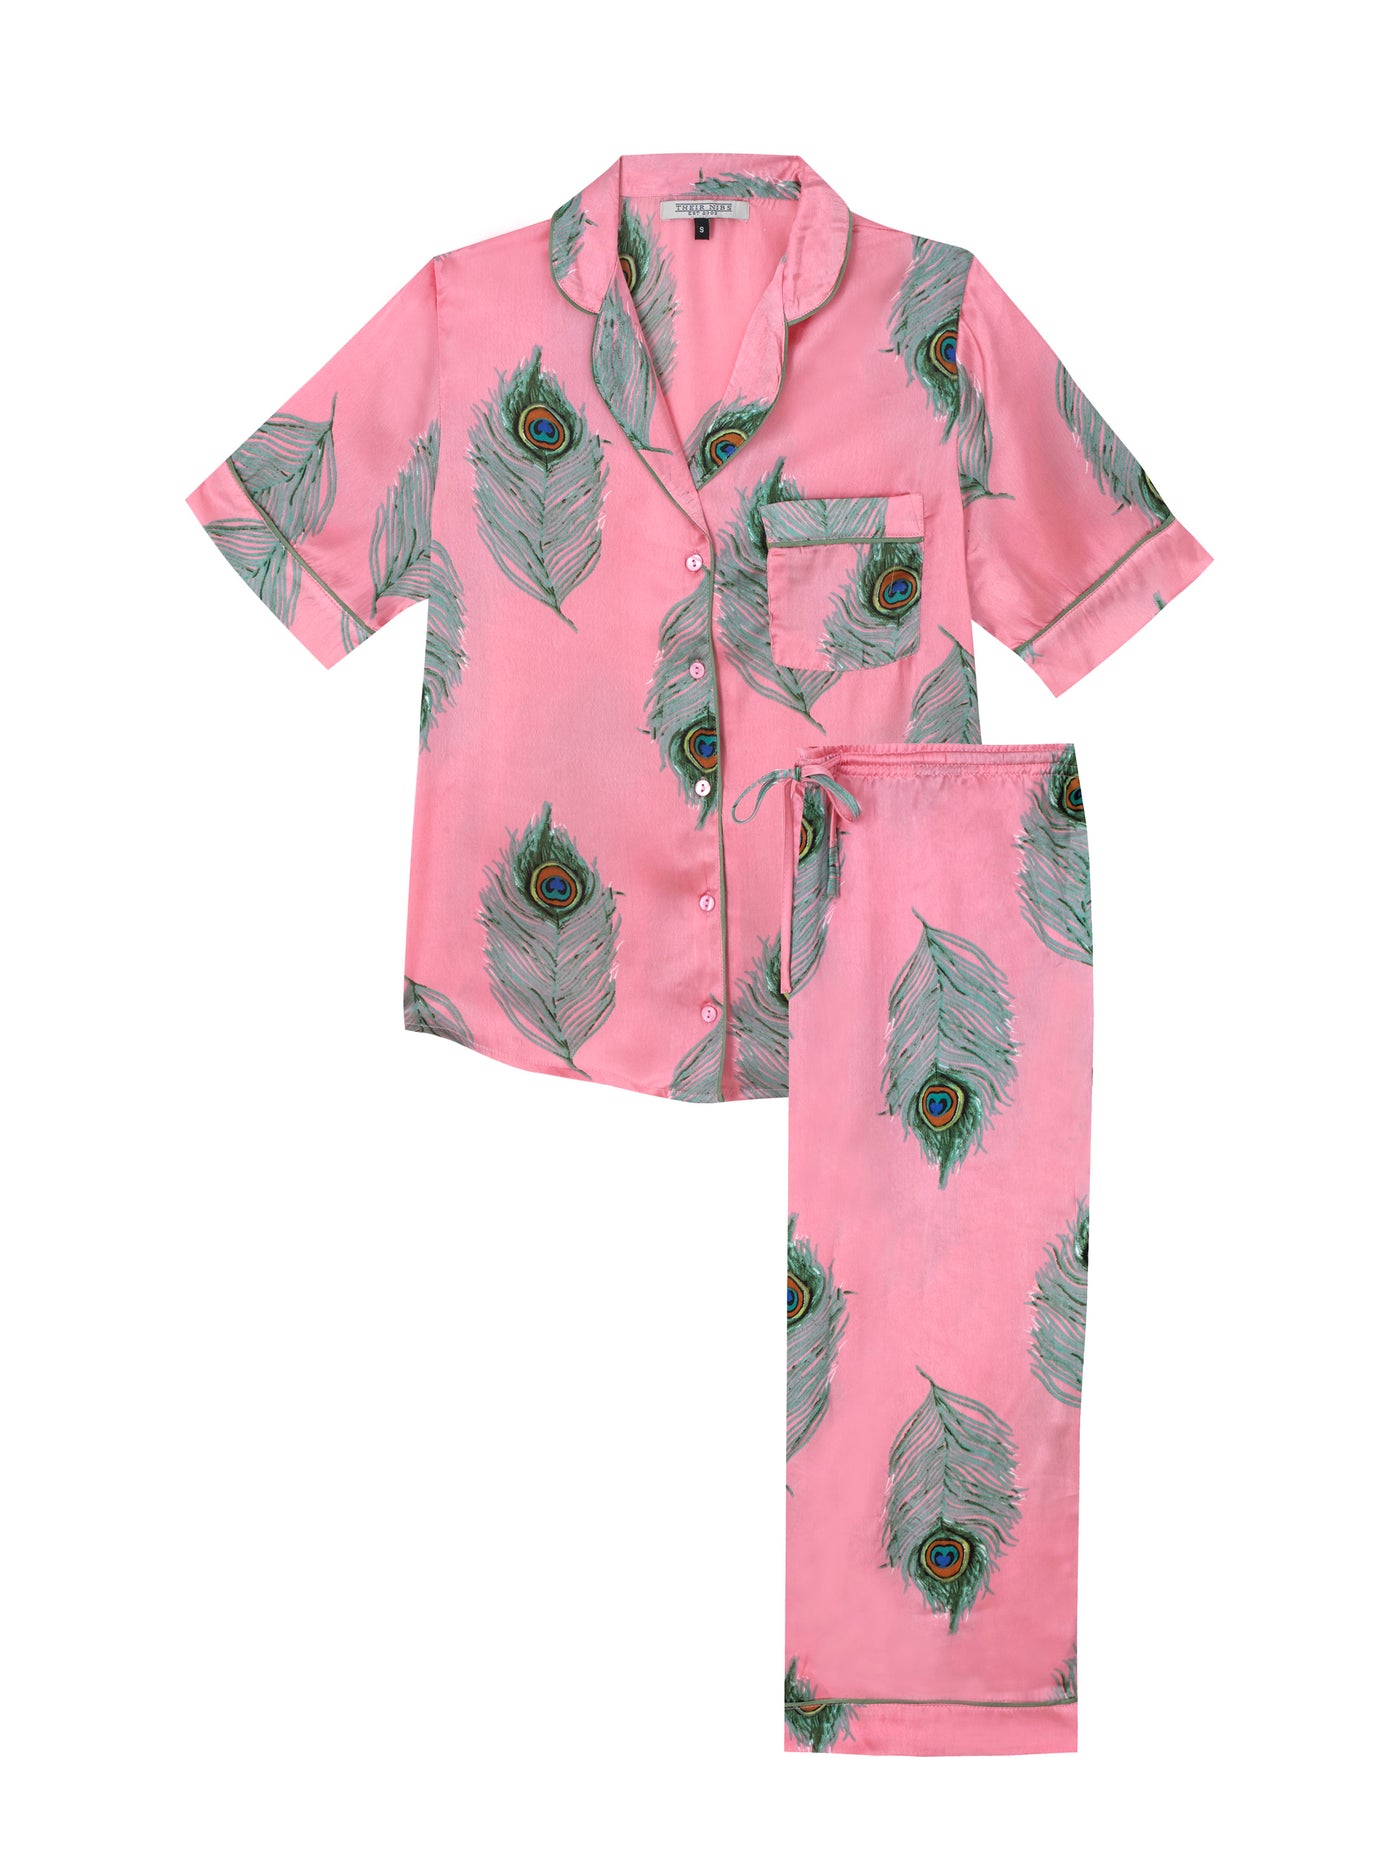 Flat shot of warm pink based ladies capri satin pyjamas, Capri length, with repeating green peacock feather pattern, green piping on cuffs and collar